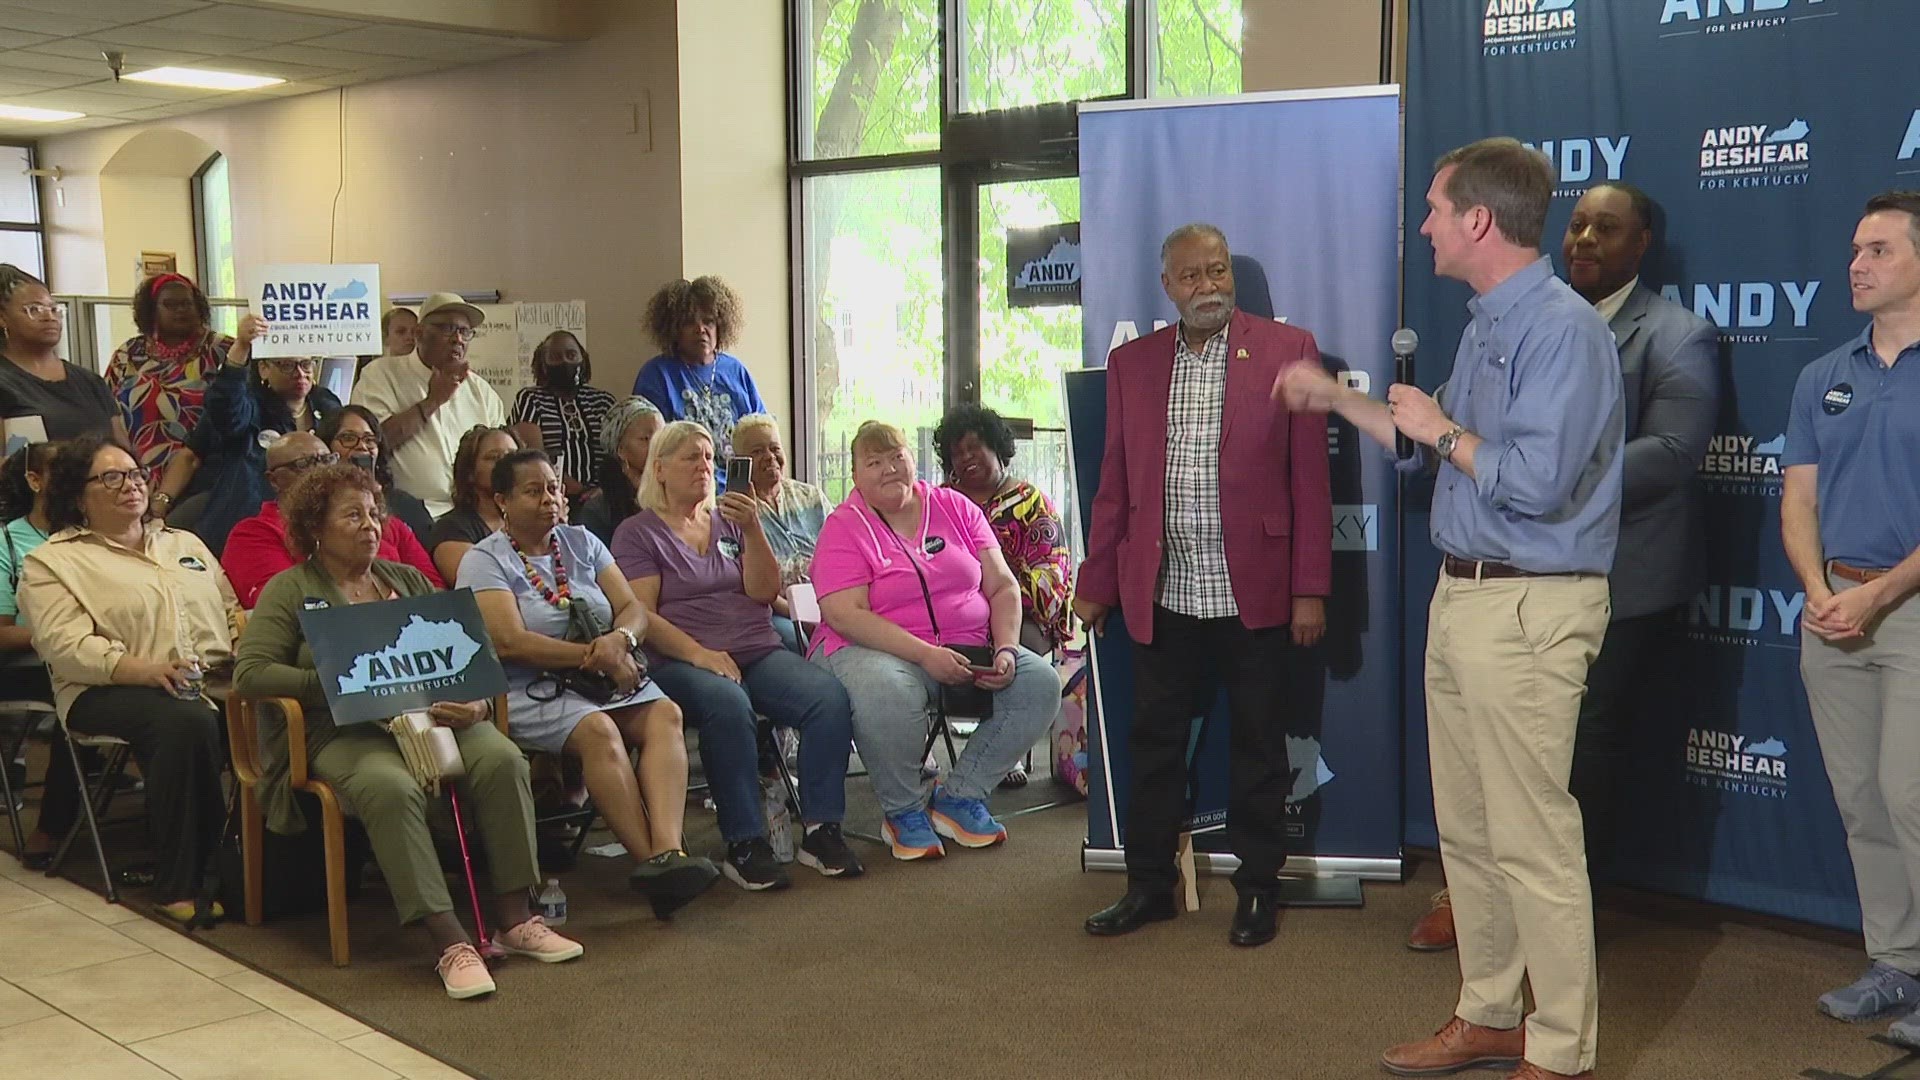 The governor held the open house, hearing from his constituents as he seeks re-election in November.